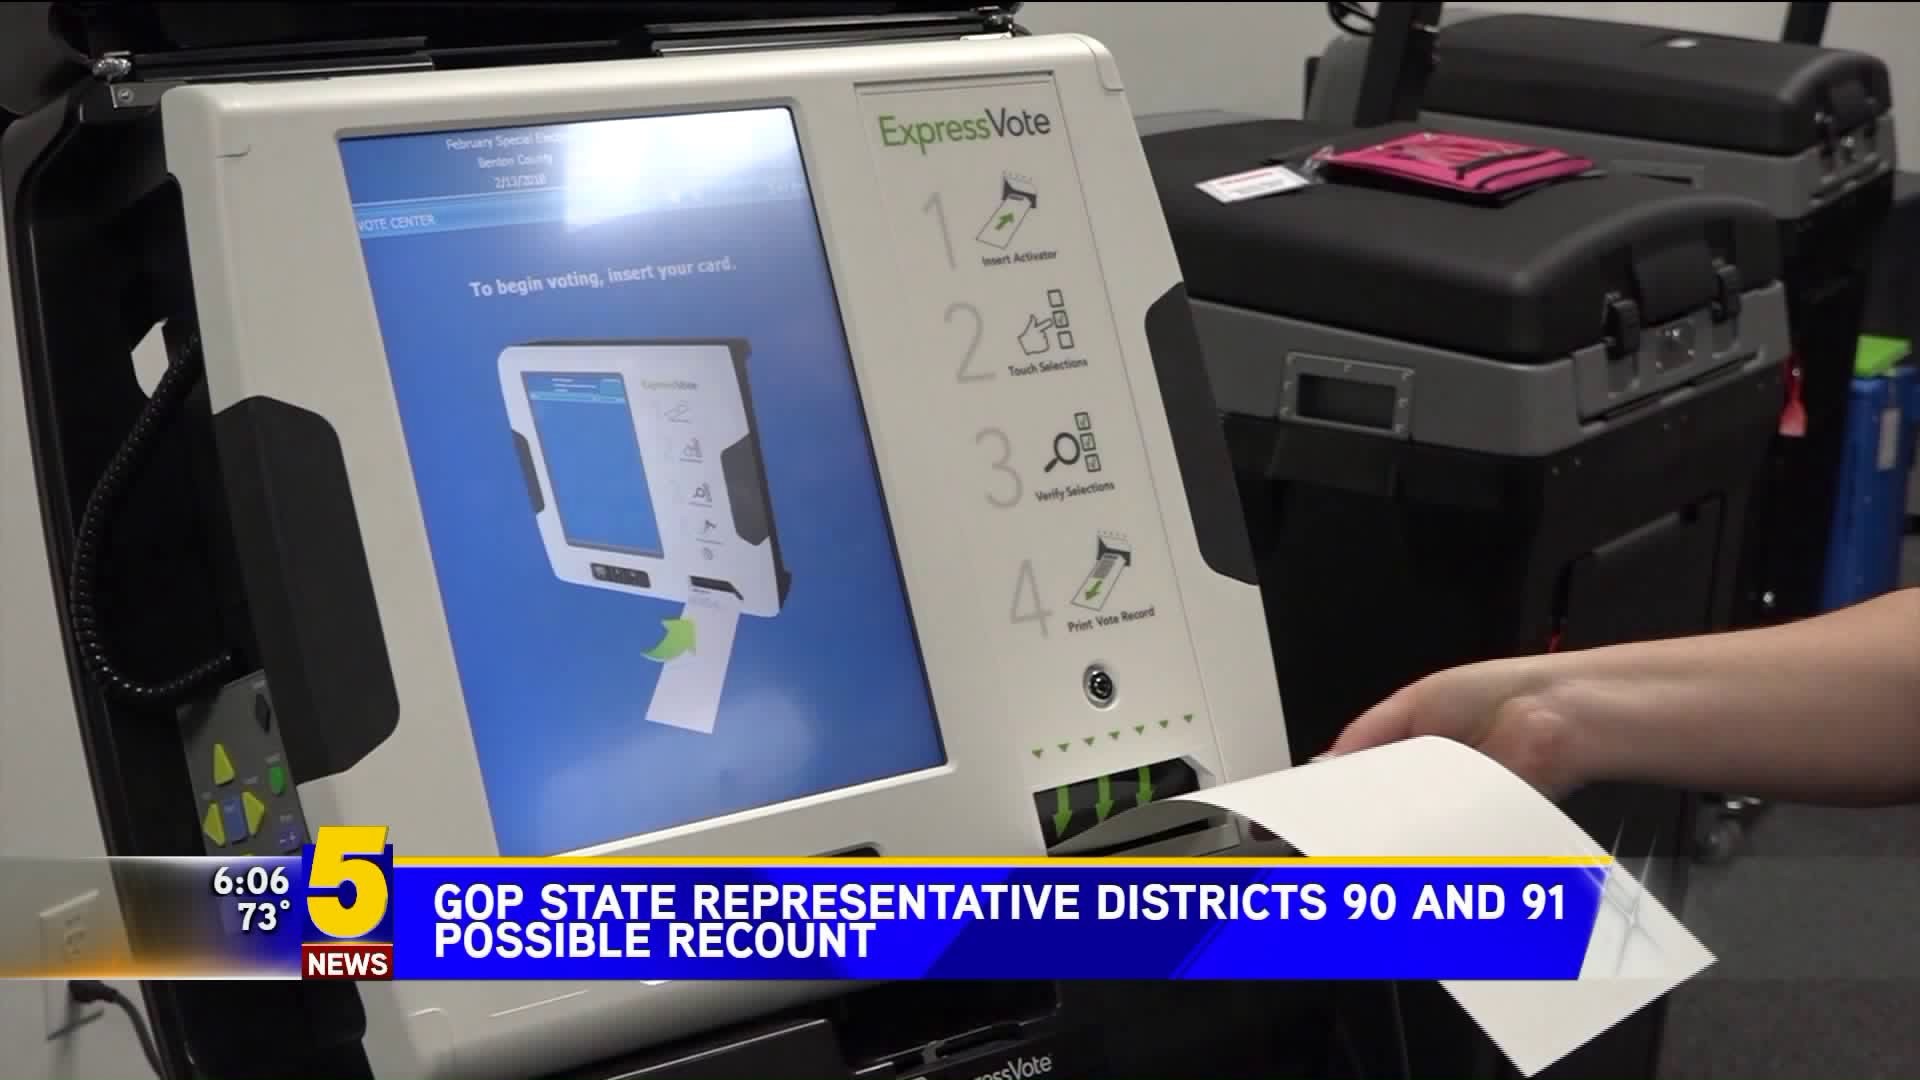 Possible Recount